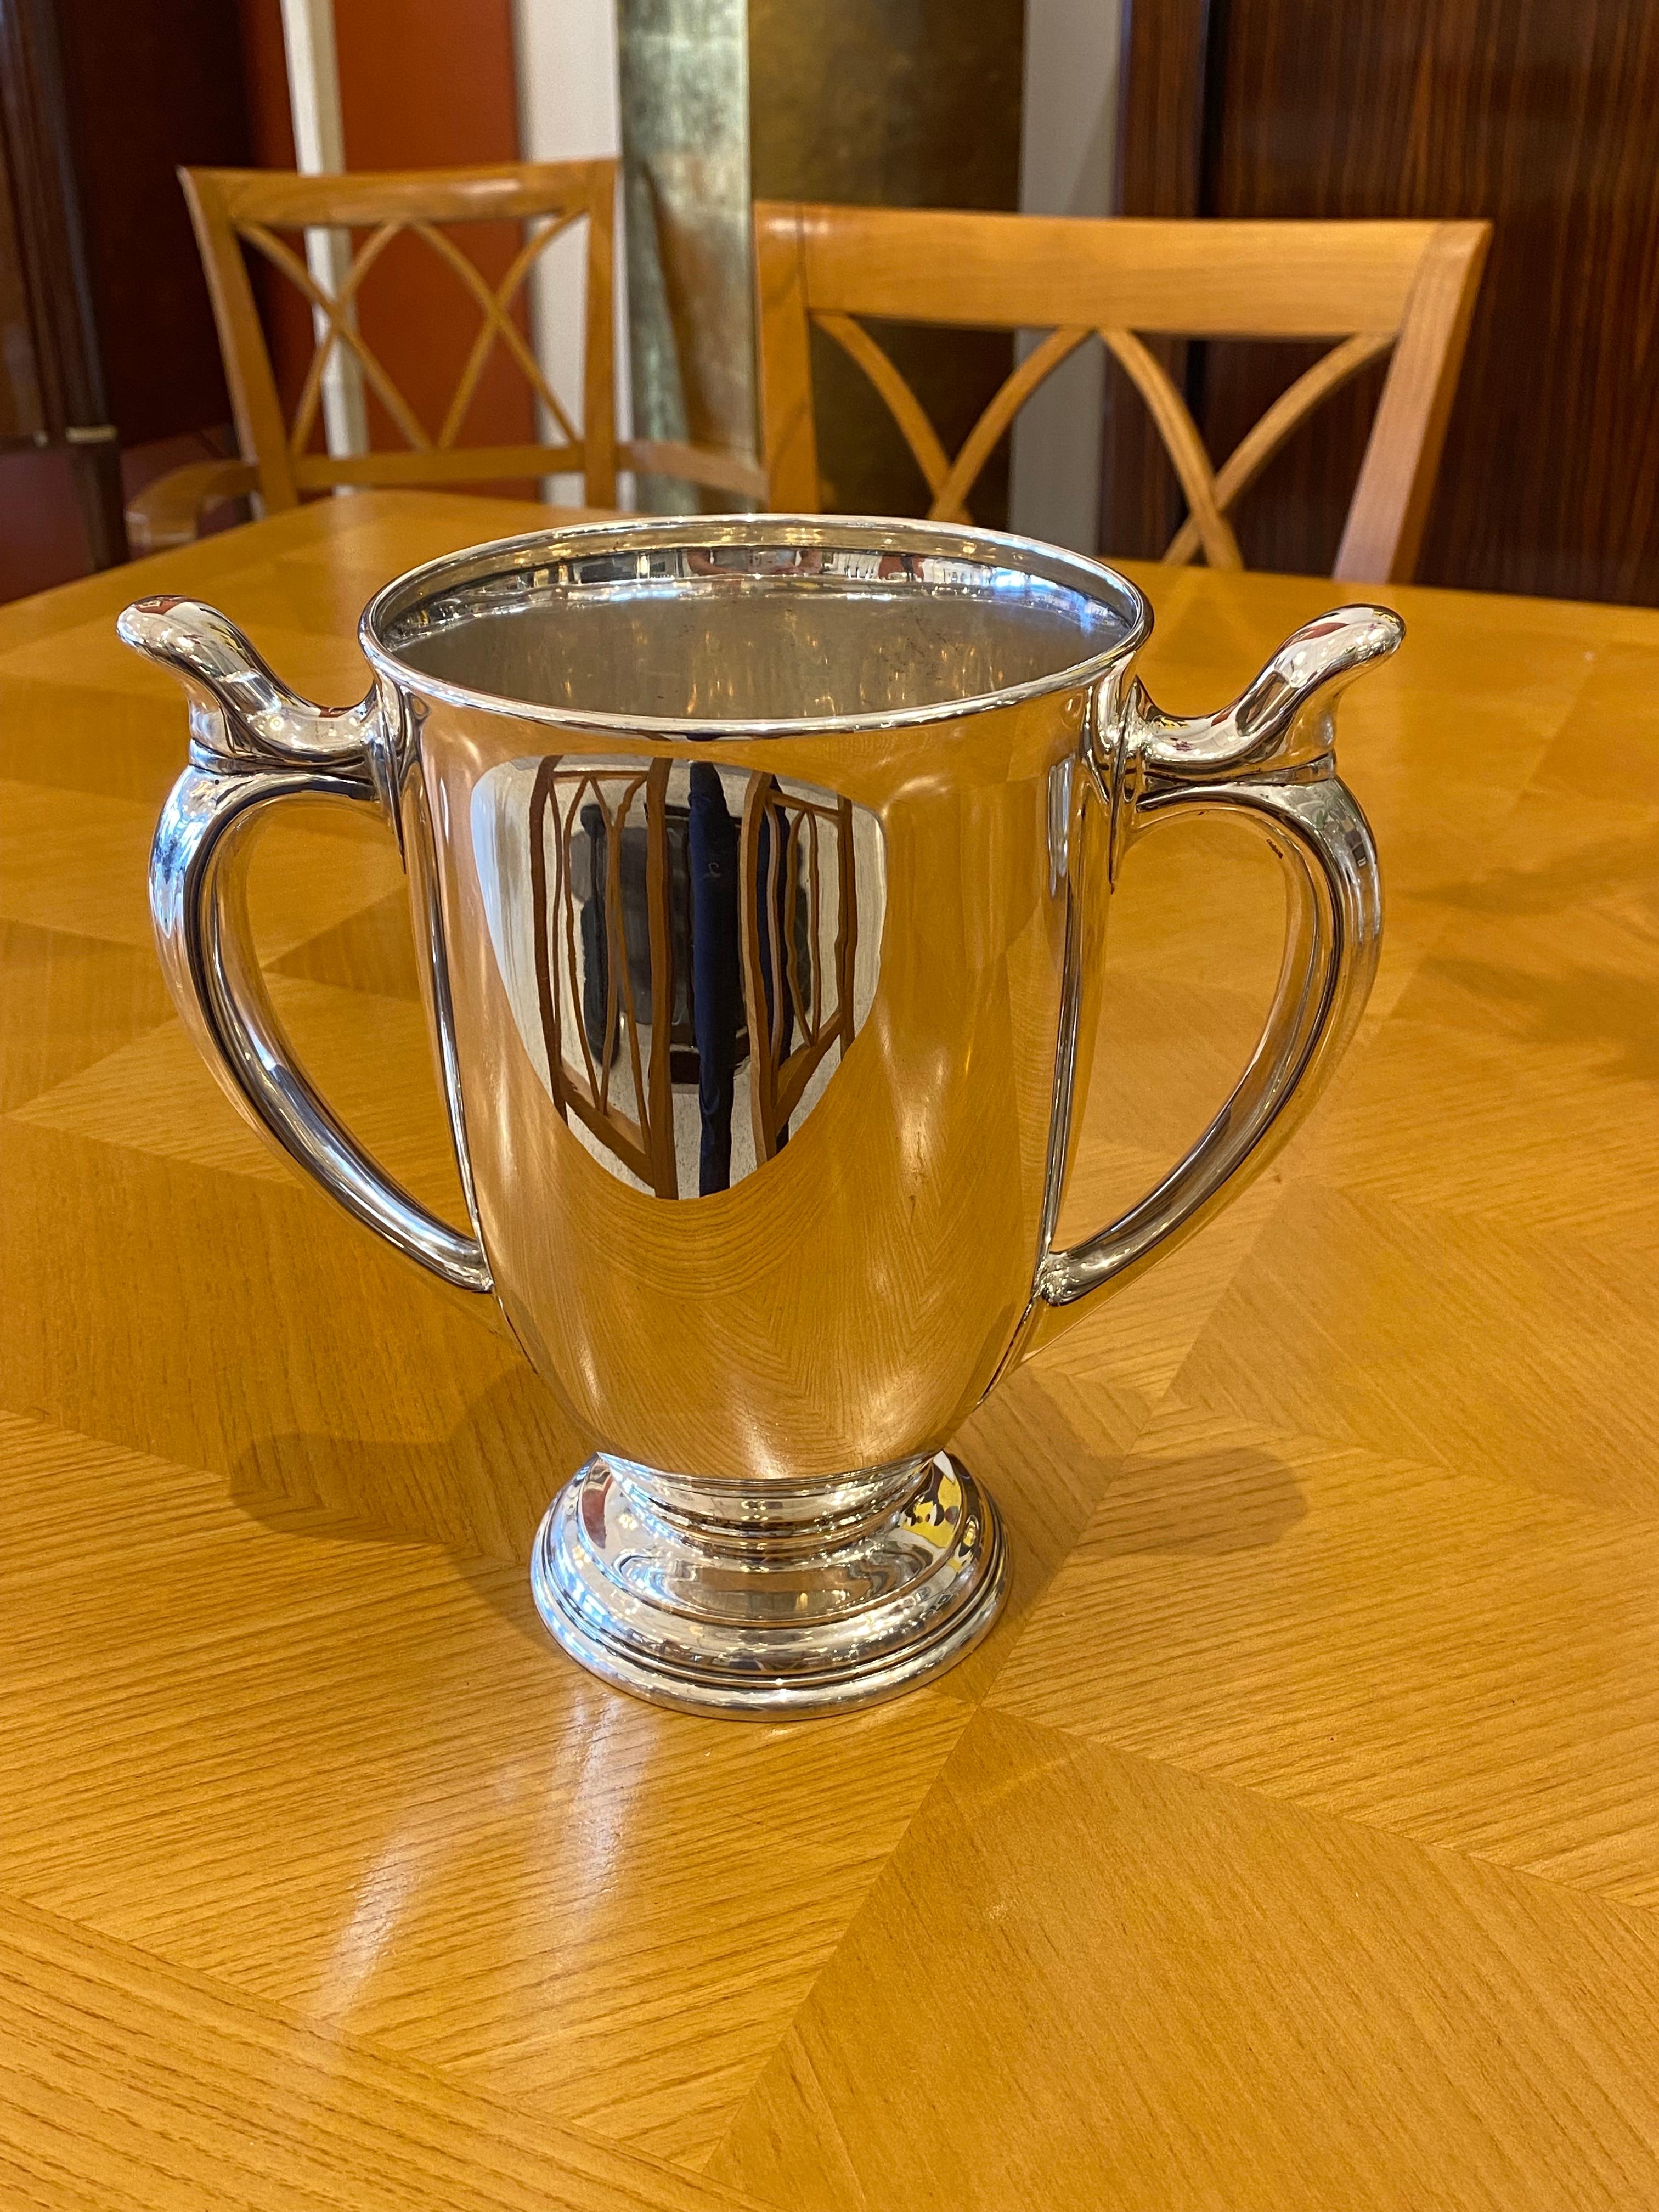 A vintage Sterling Silver ice bucket. Sealed and Numbered by Tiffany & Co.
Made in the USA.